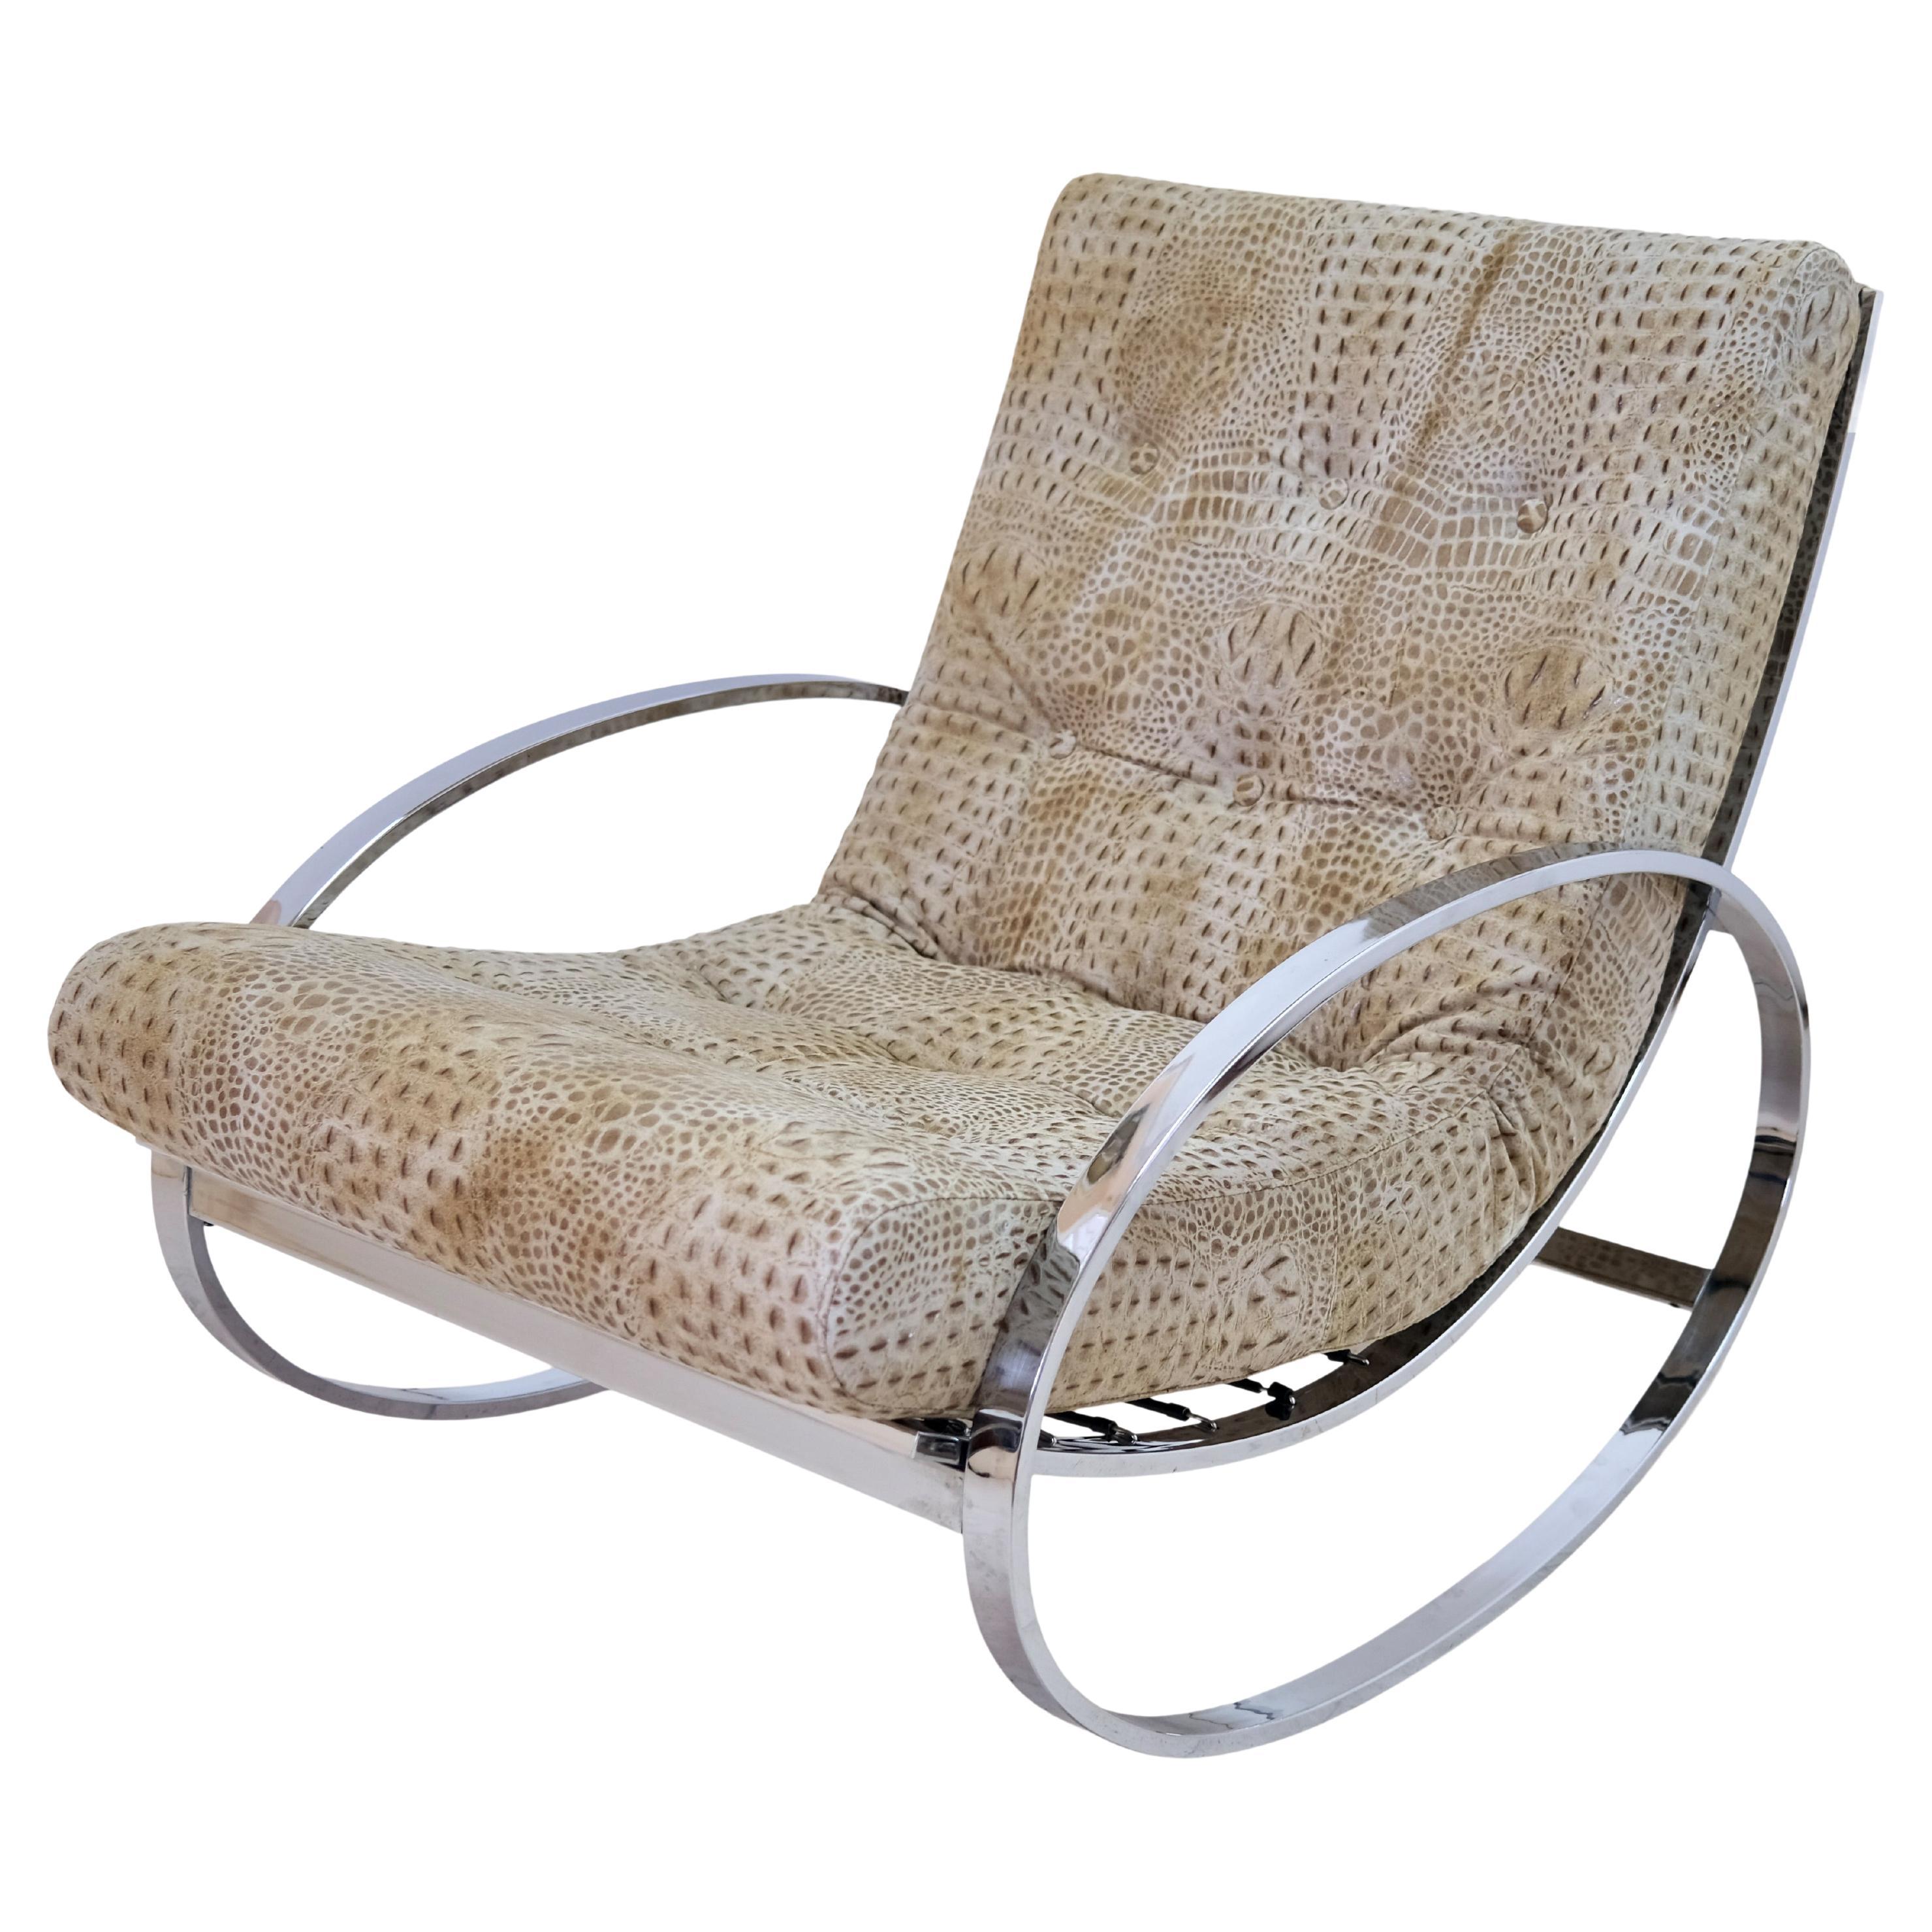 Mid-Century Modern Chrome Steel Tube Rocking Chairs with Croco-Stlye Upholstery